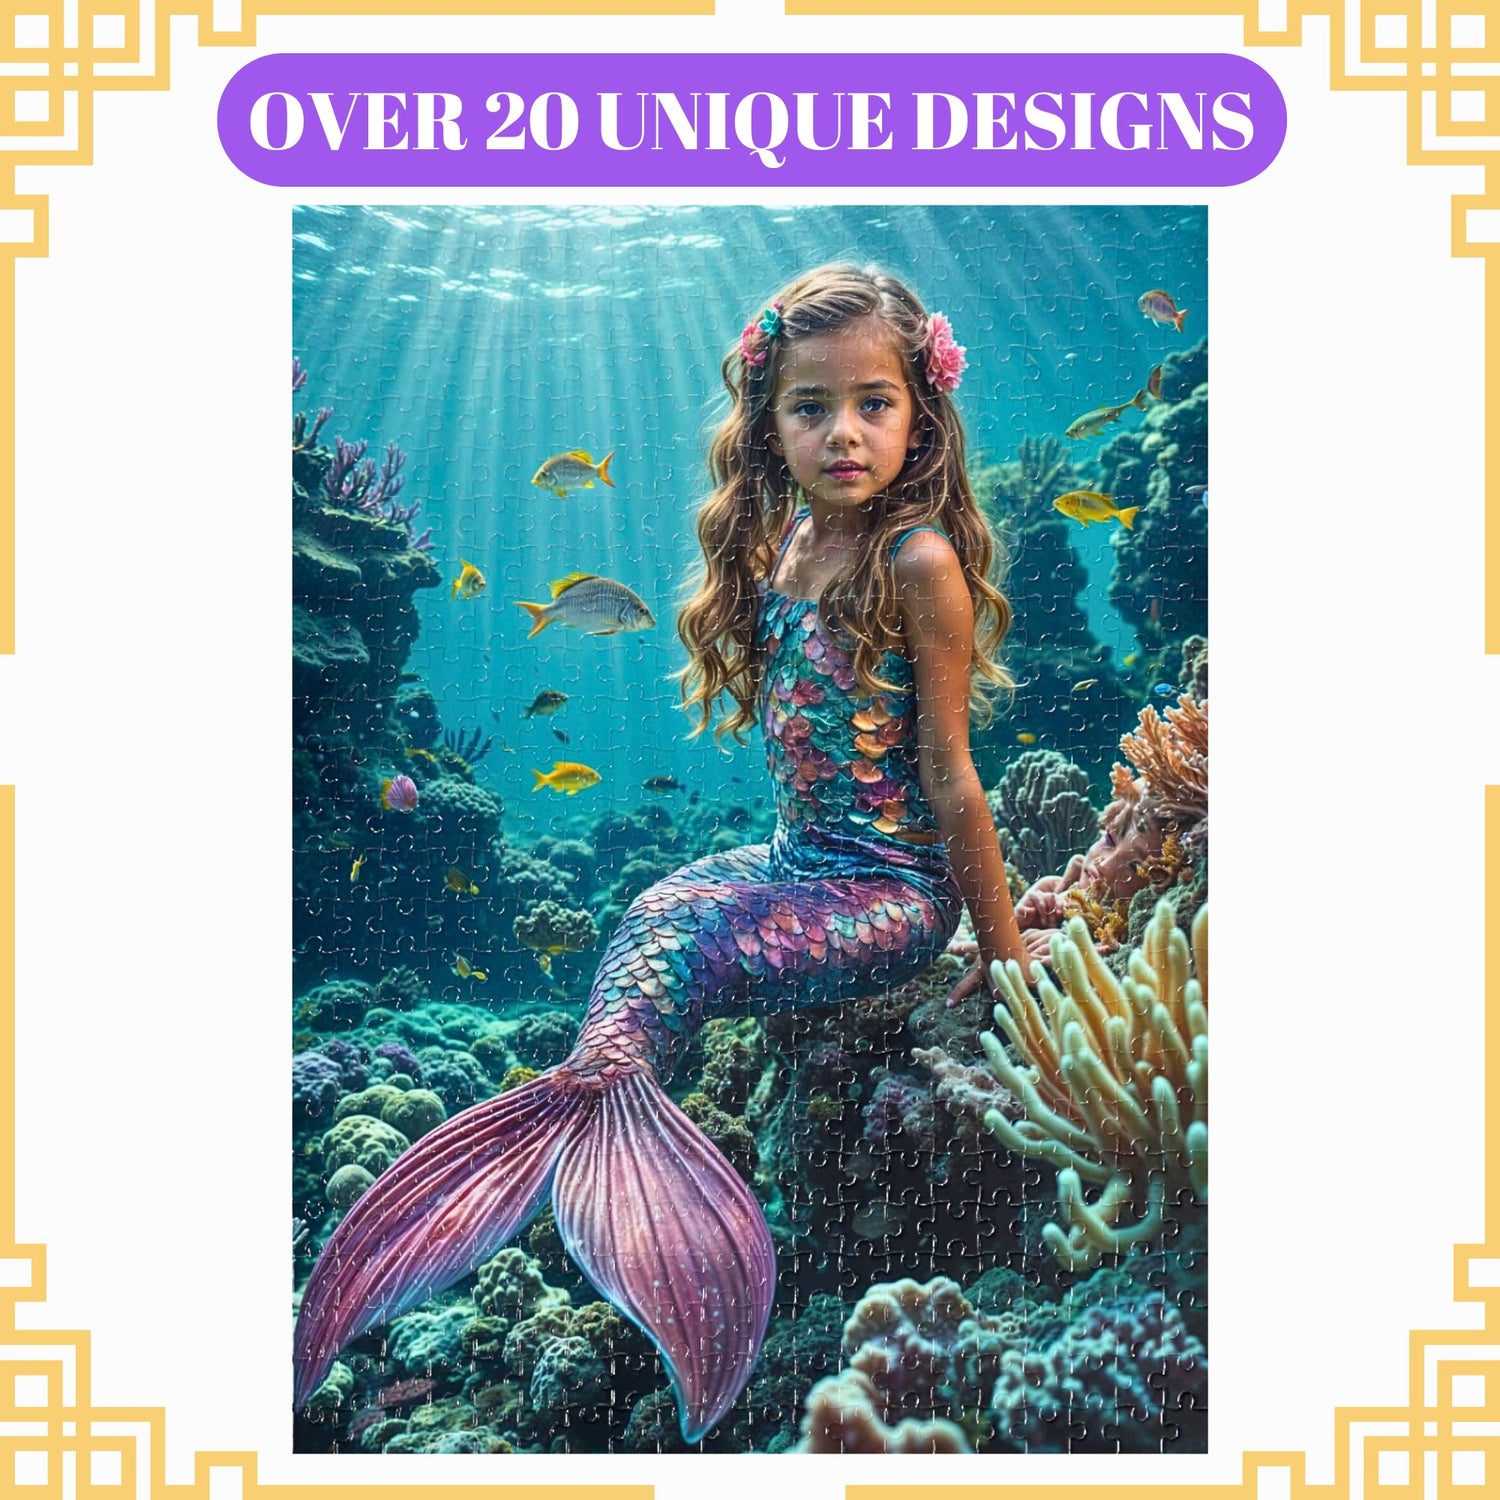 Custom Mermaid Puzzle from Photo, Personalized Girl Little Mermaid puzzle, Custom Princess Portrait Mermaid Gifts Princess Birthday Gift (69)